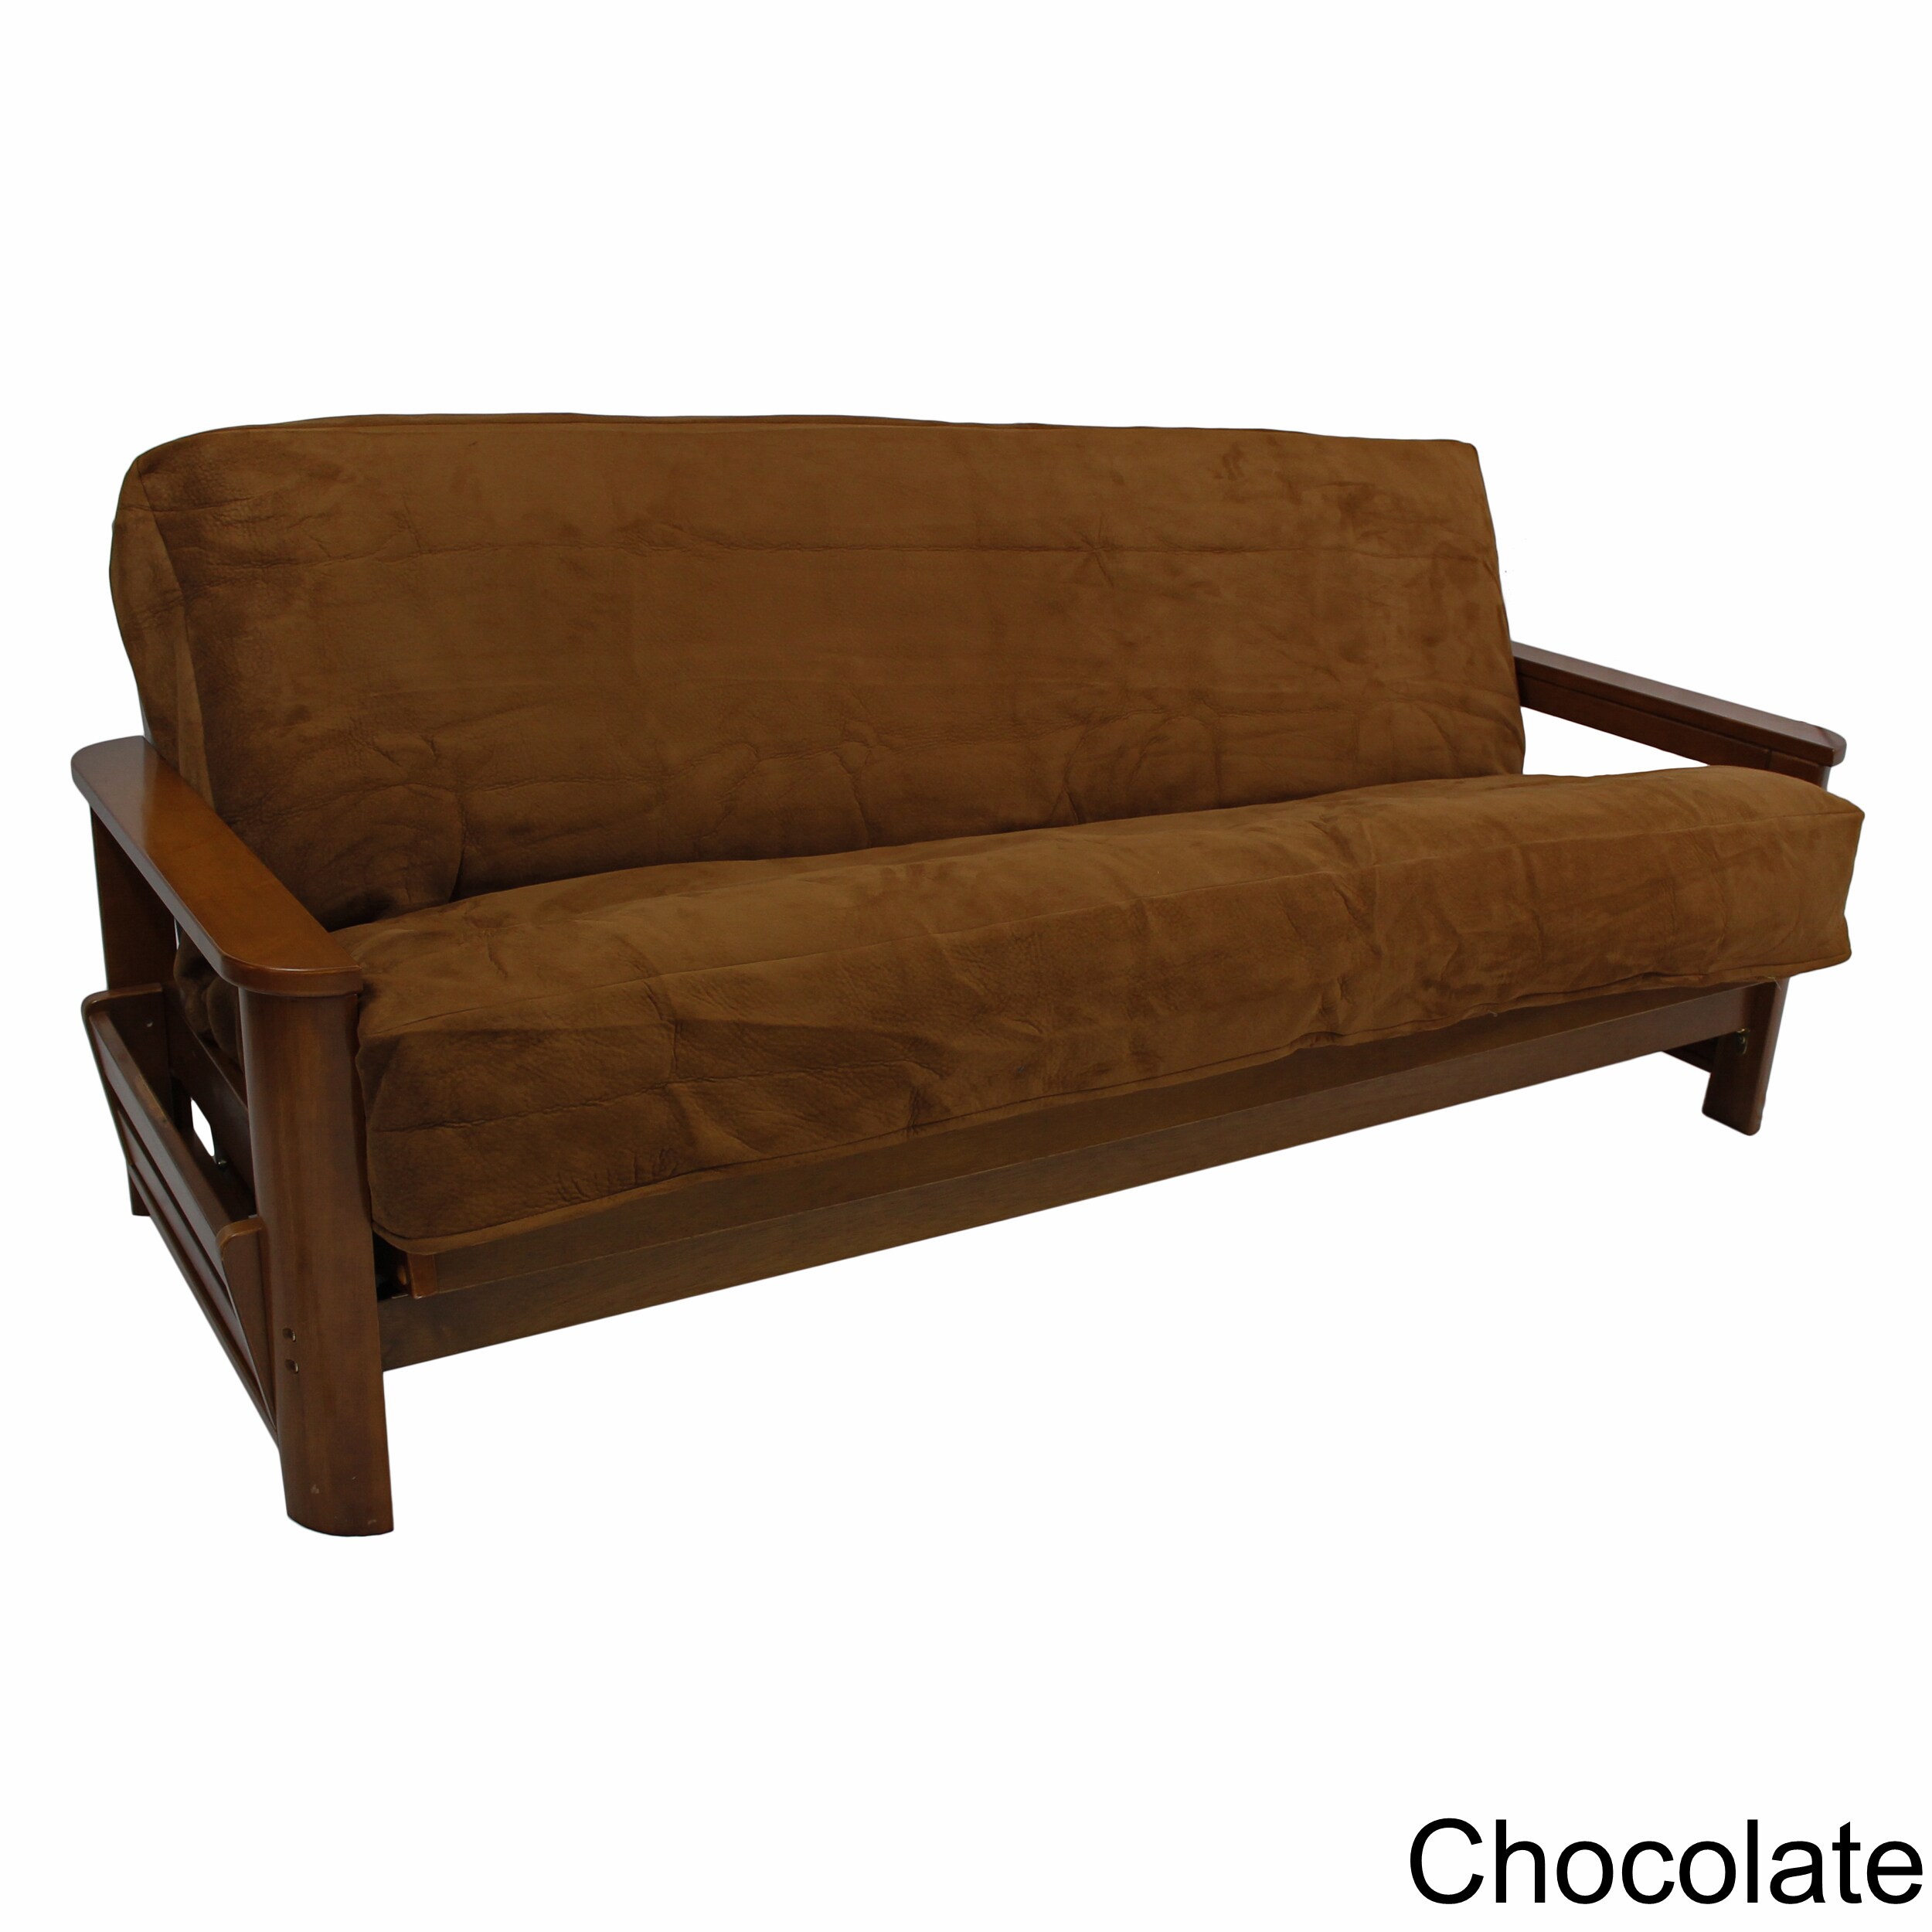 Blazing Needles Solid Foam-Backed Microsuede 8" to 9" Futon Cover, Full, Tan - image 5 of 5